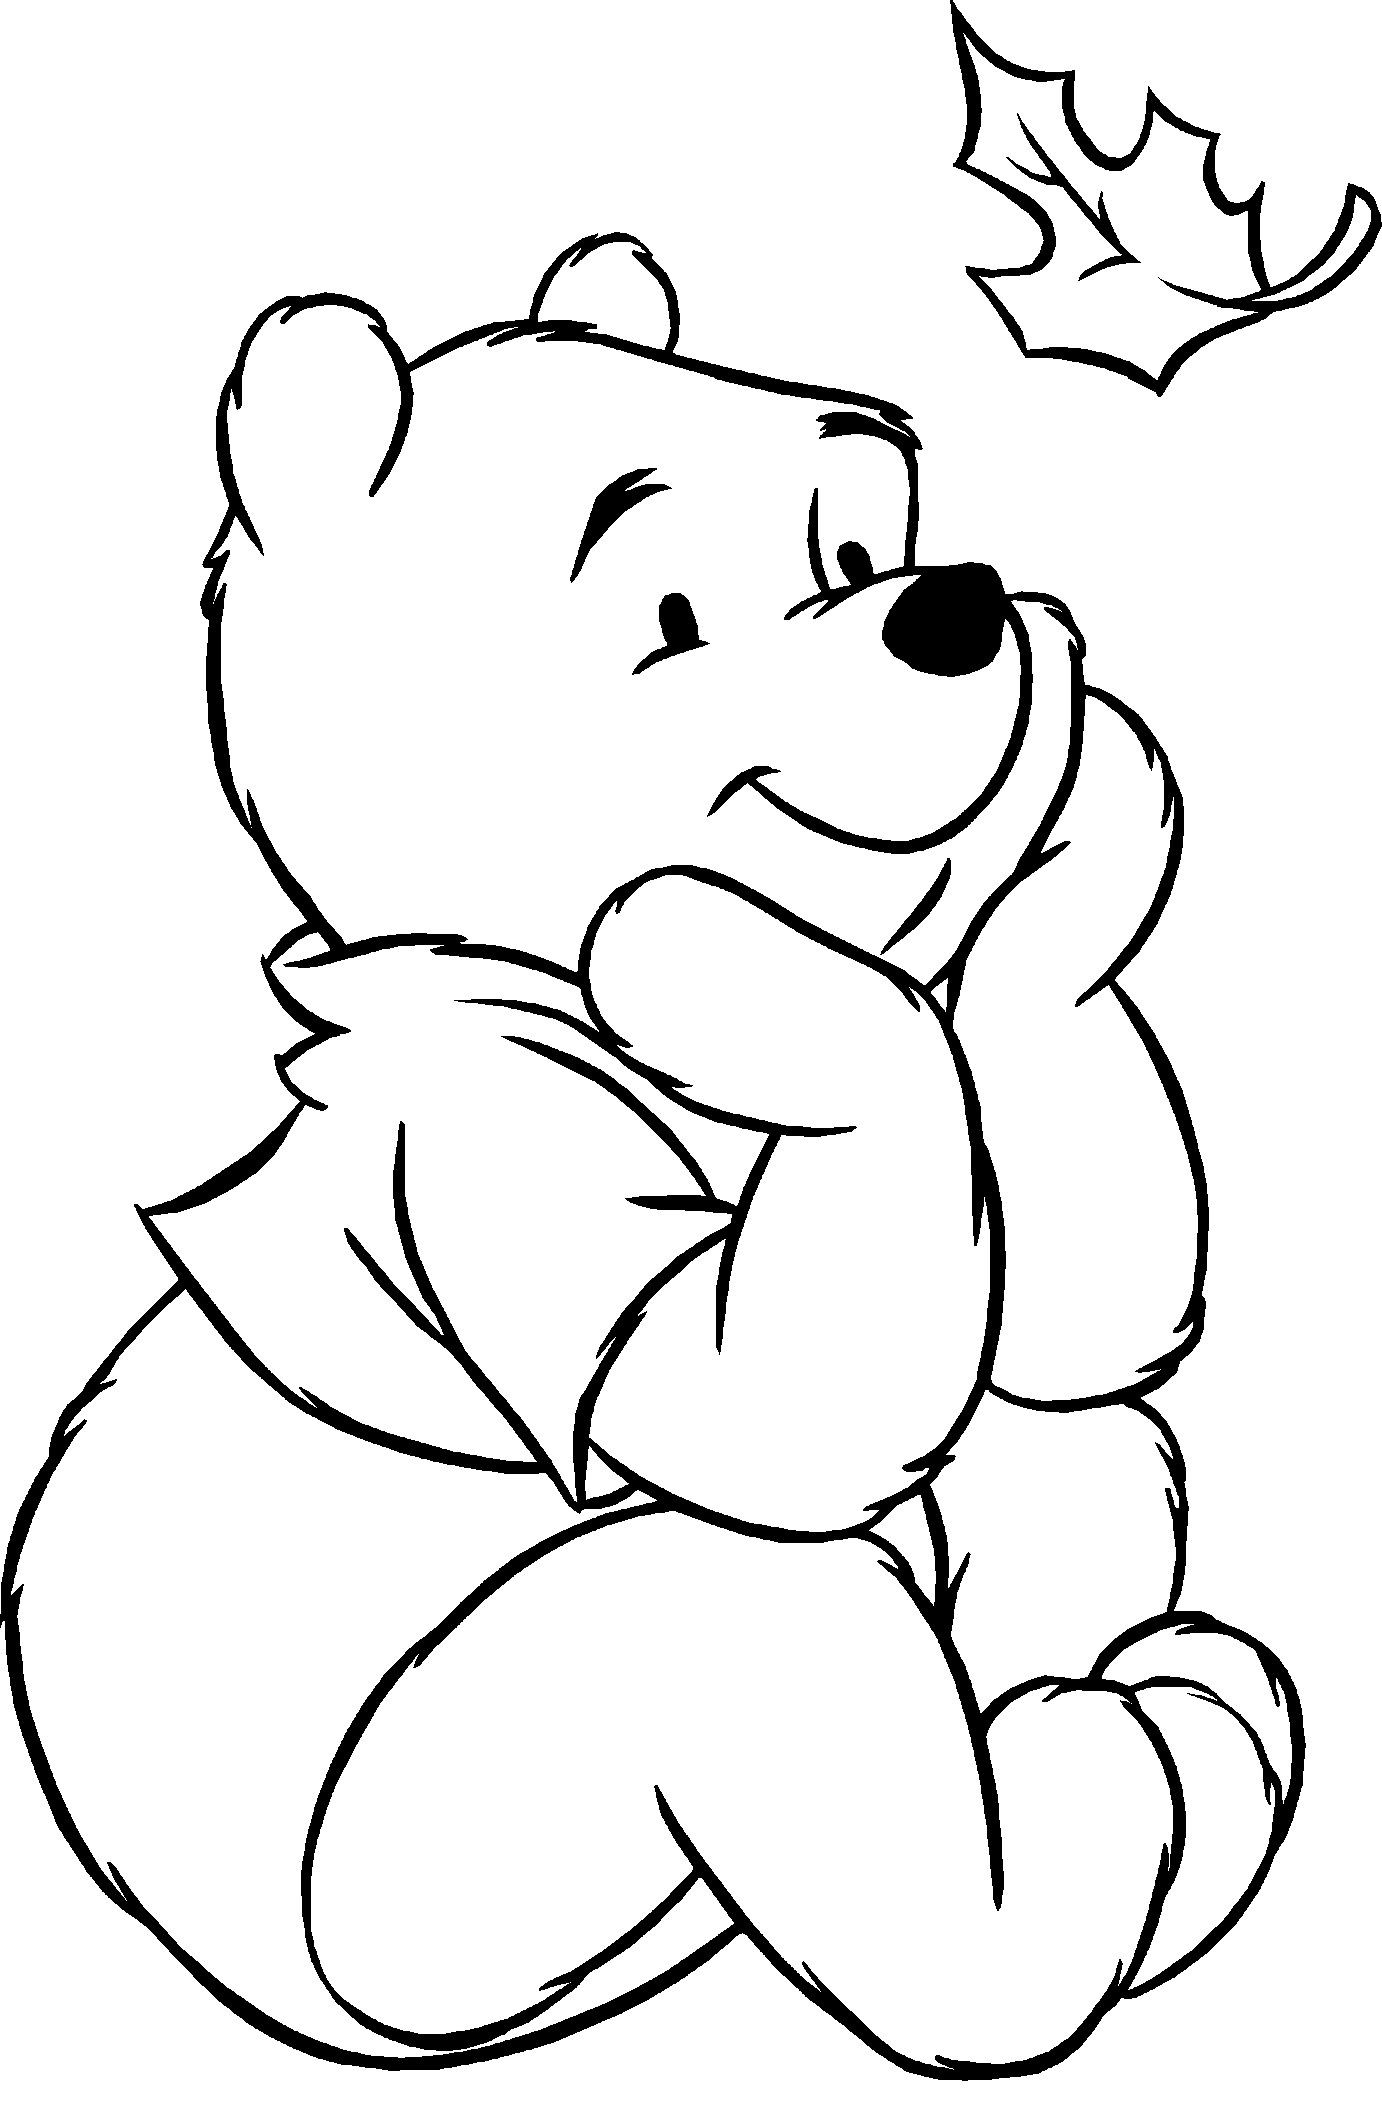 Coloring Sheets For Boys Disneys
 Disney Coloring Pages For Boys